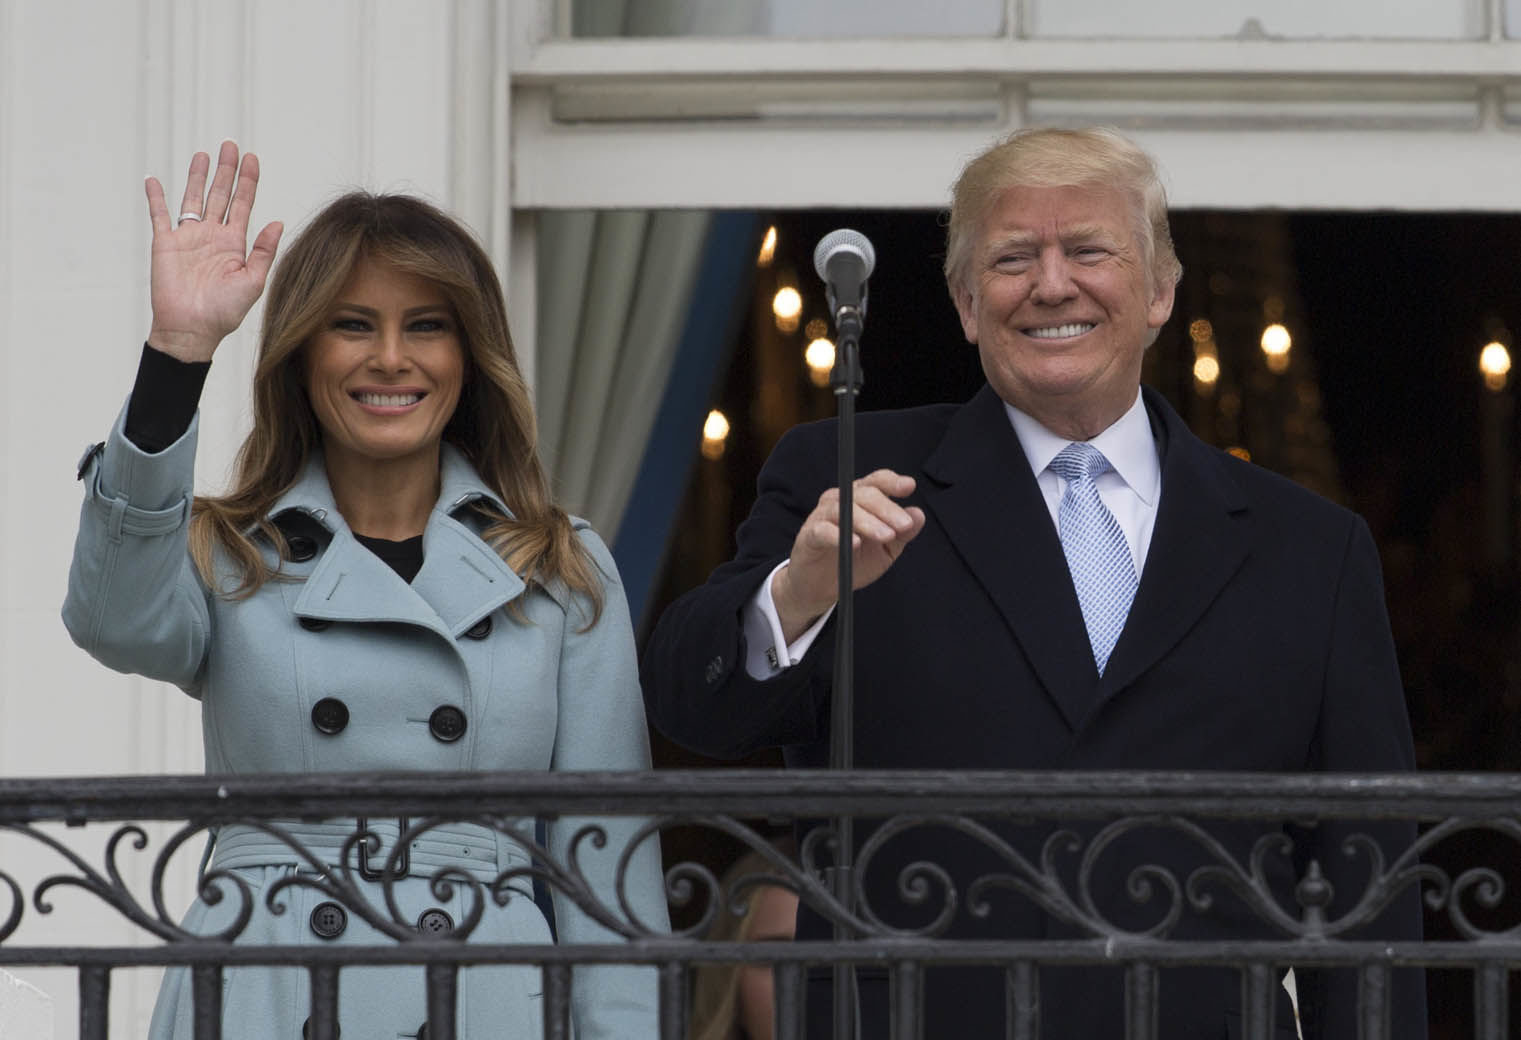 President Donald Trump and first lady Melania Trump wave from the Truman Balcony of the White House in Washington, Monday, April 2, 2018, during the annual White House Easter Egg Roll. (AP Photo/Carolyn Kaster)